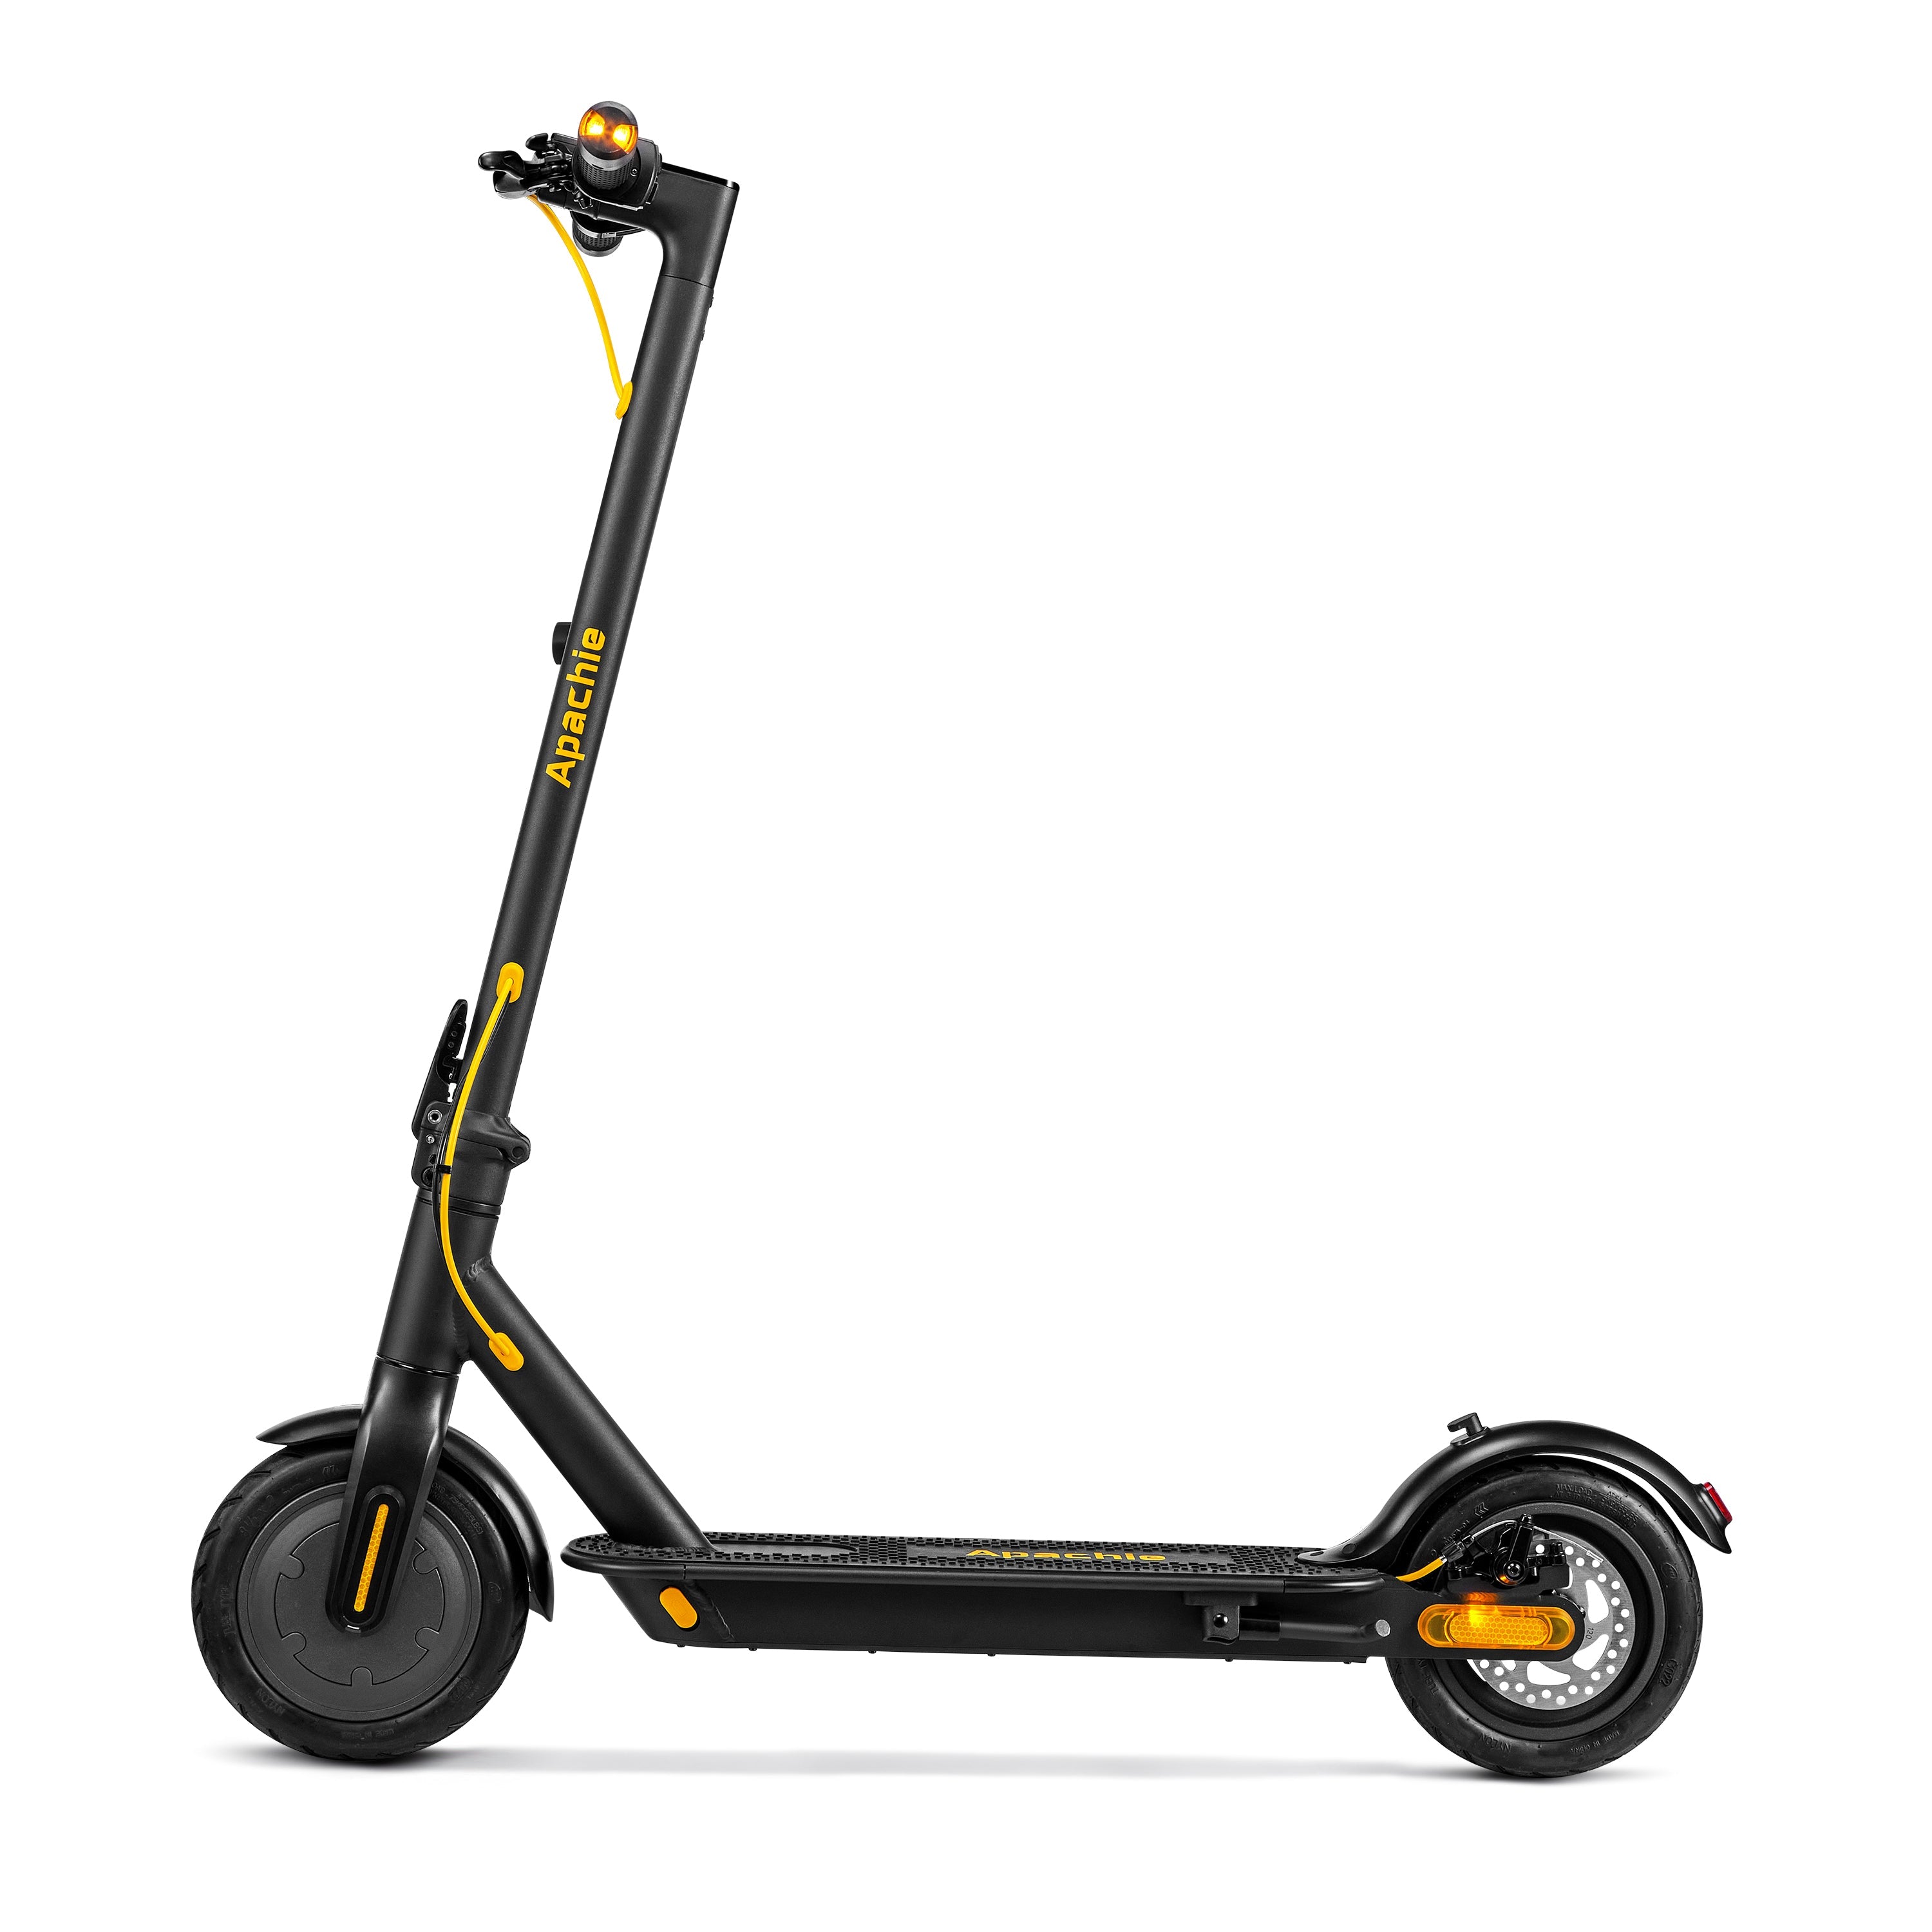 Apachie M4X 350W Electric Scooter Refurbished